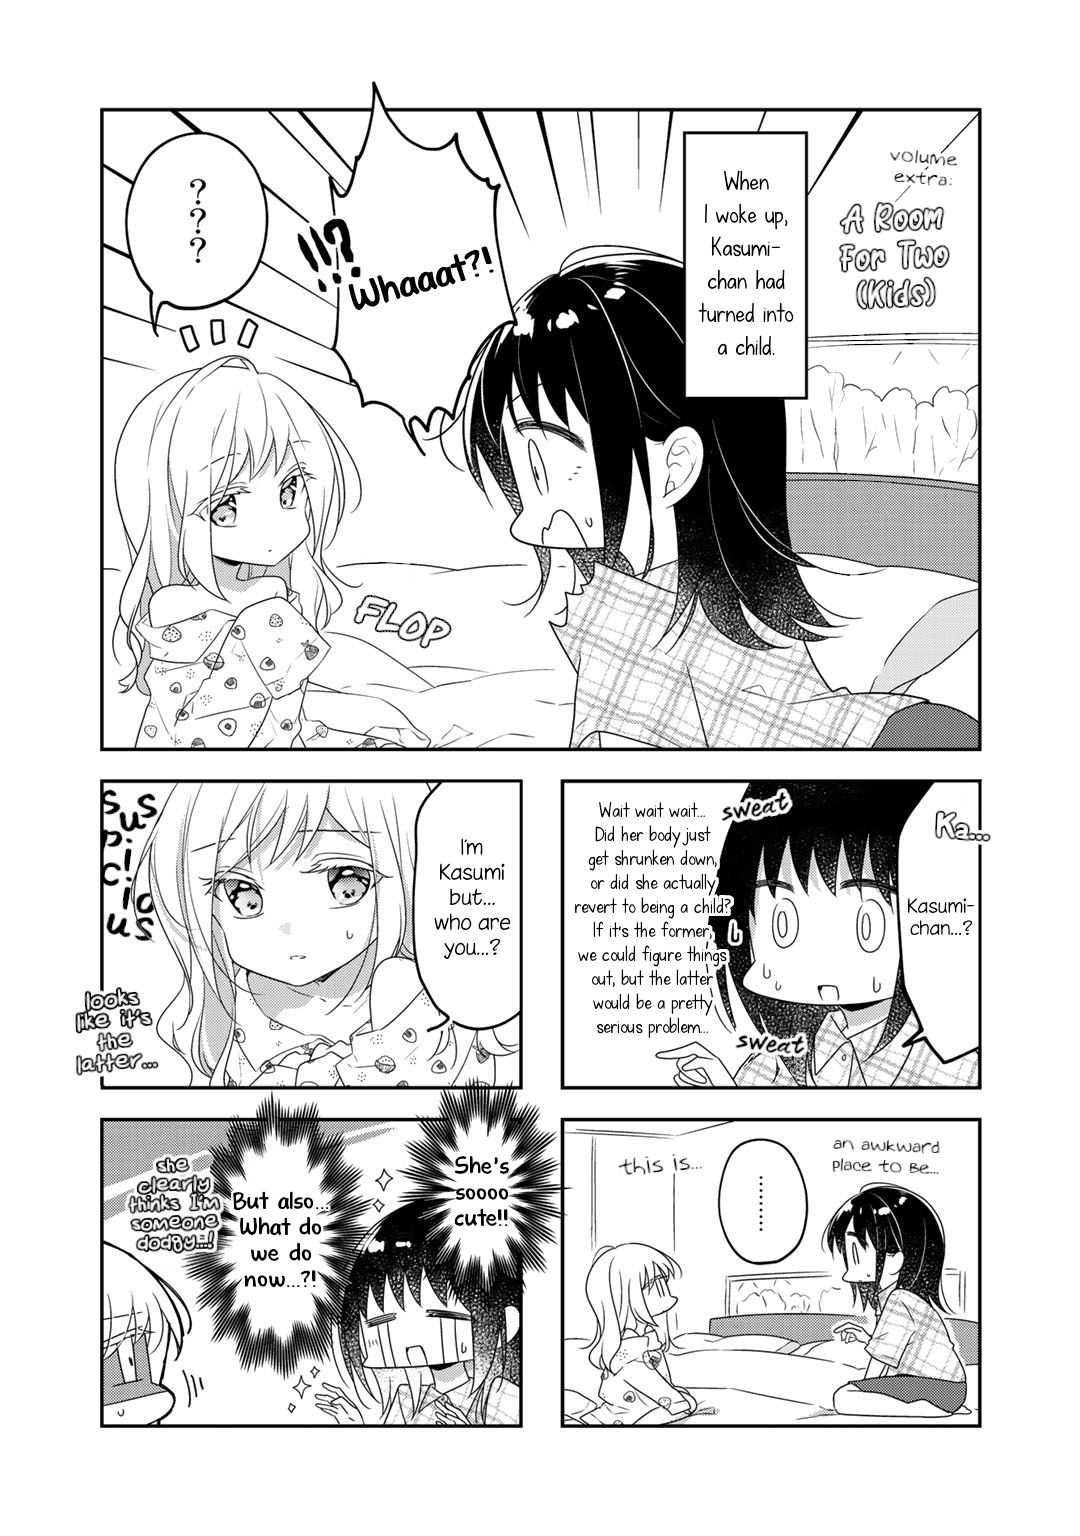 Futaribeya Vol.9 Chapter 71.72: Volume Extra: A Room For Two (Kids) - Picture 1